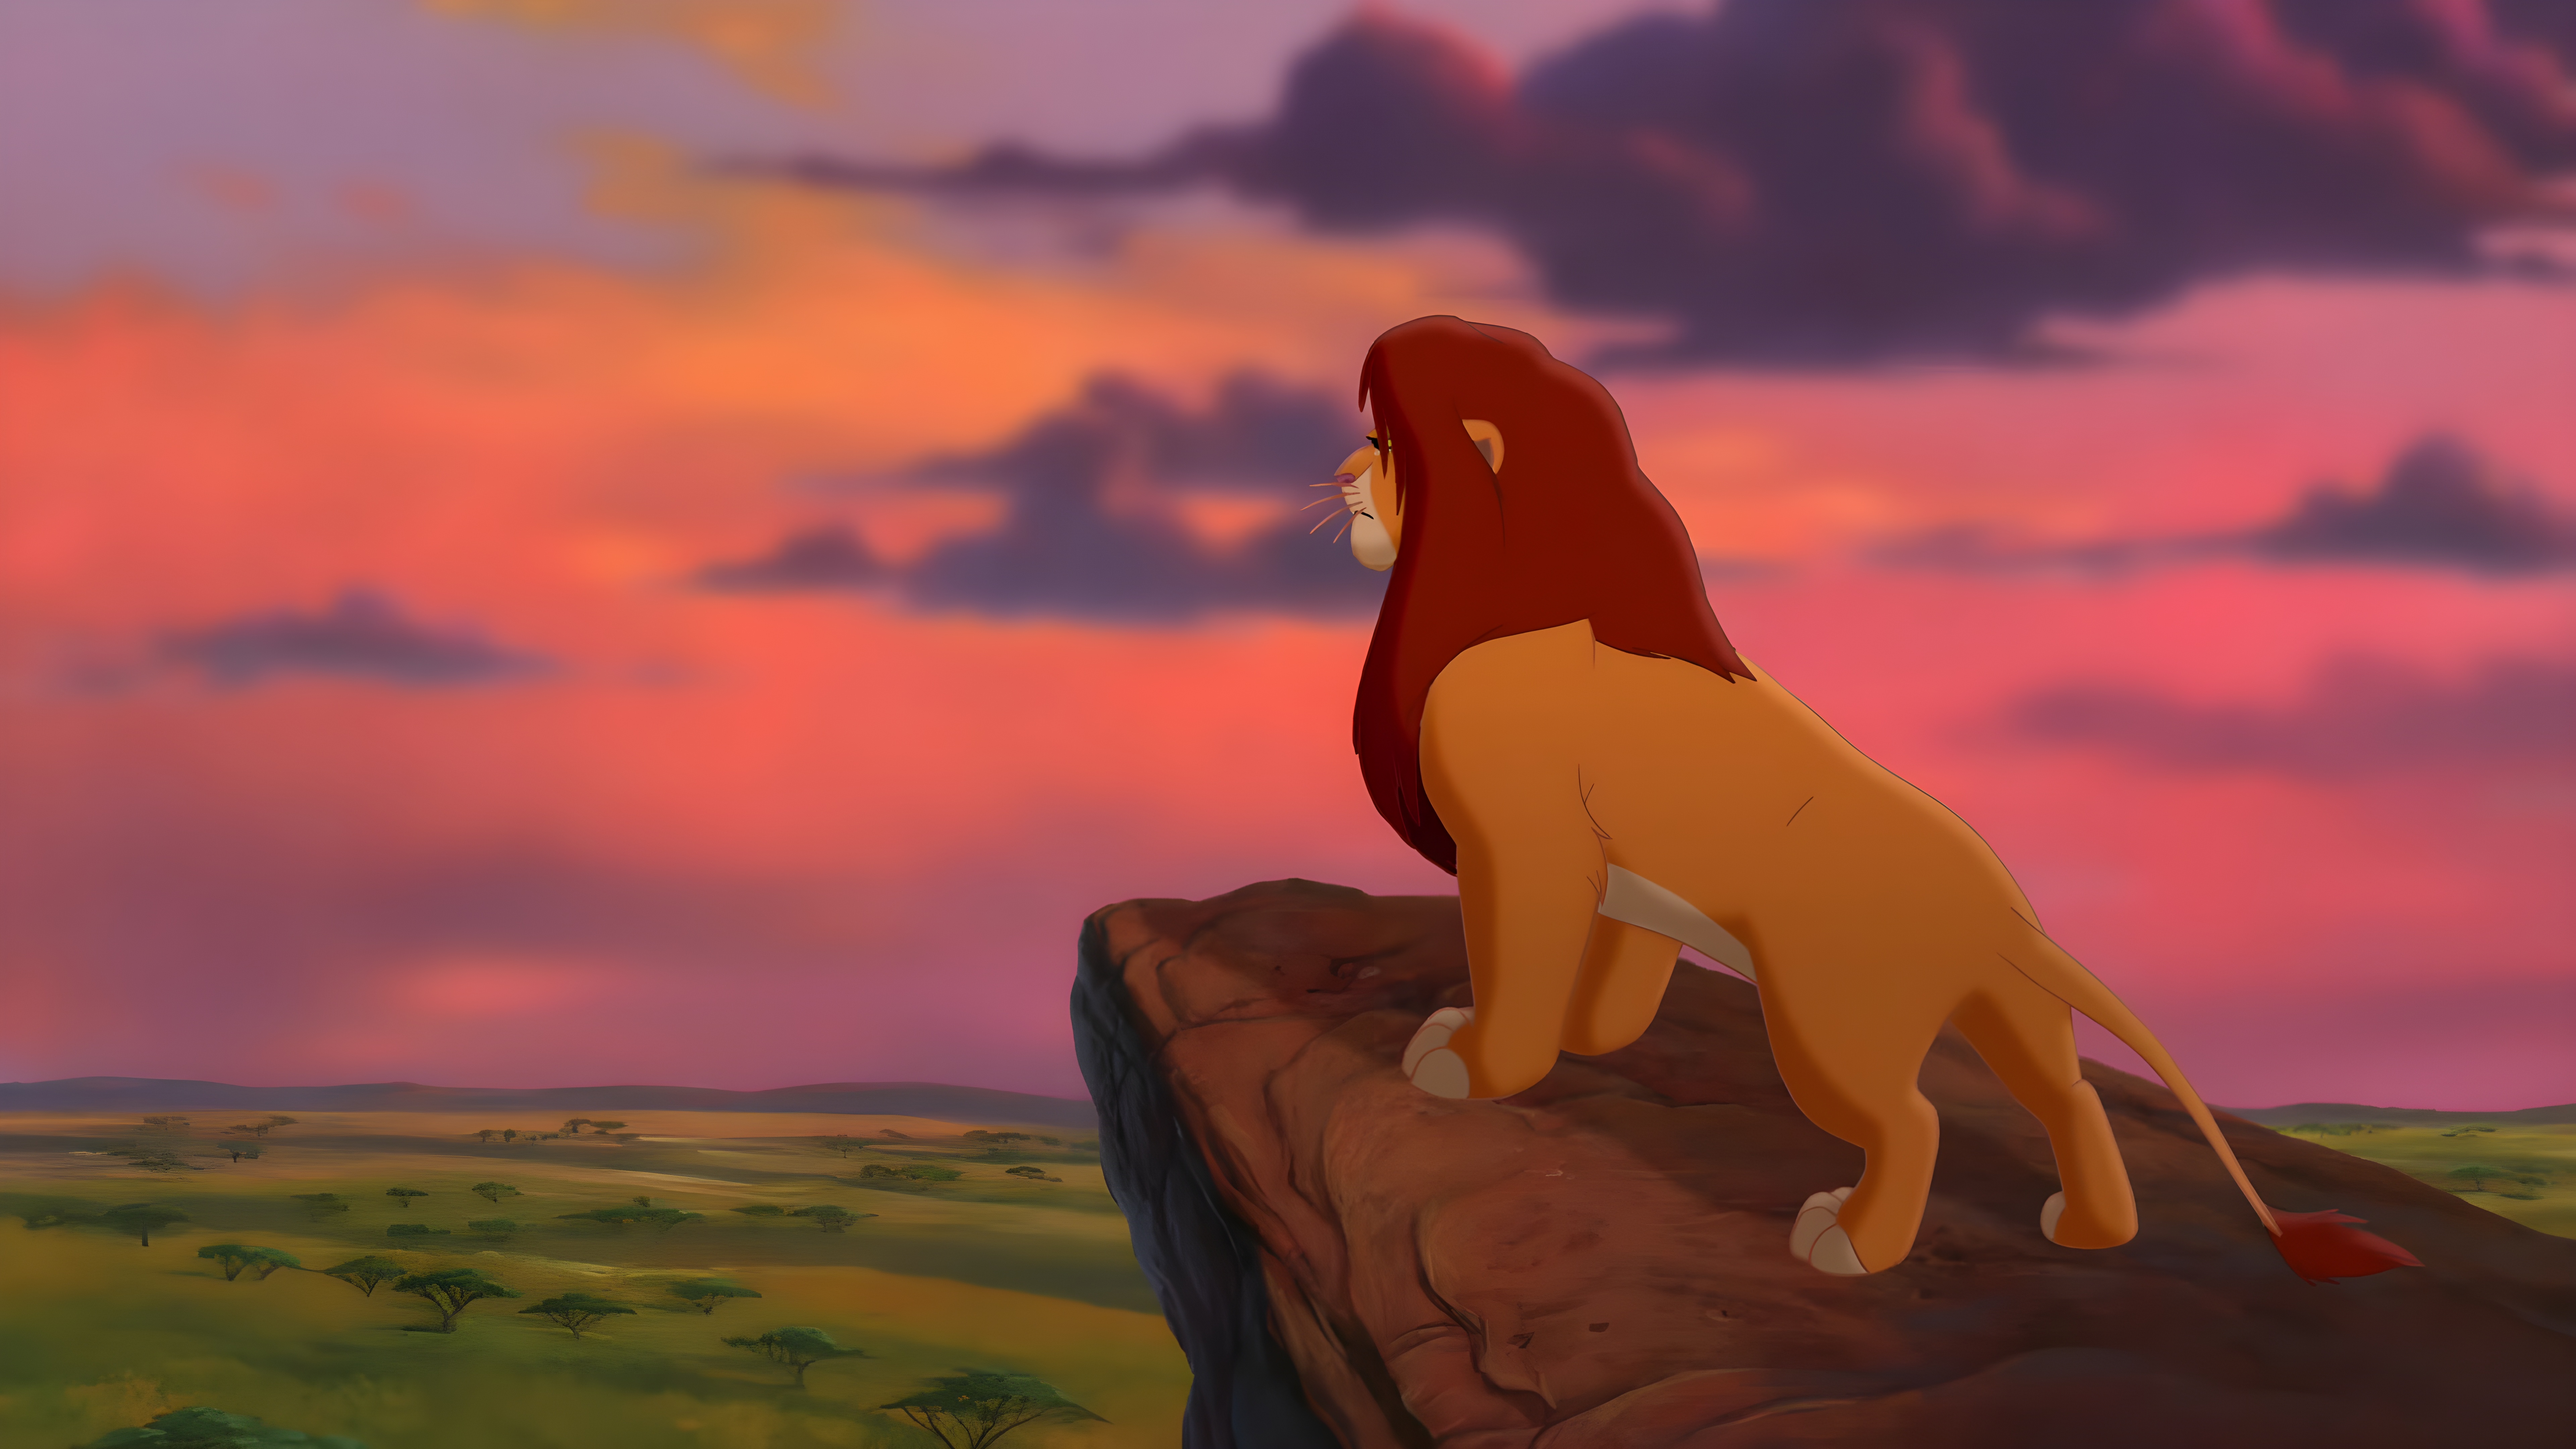 Movie The Lion King (1994) HD Wallpaper | Background Image